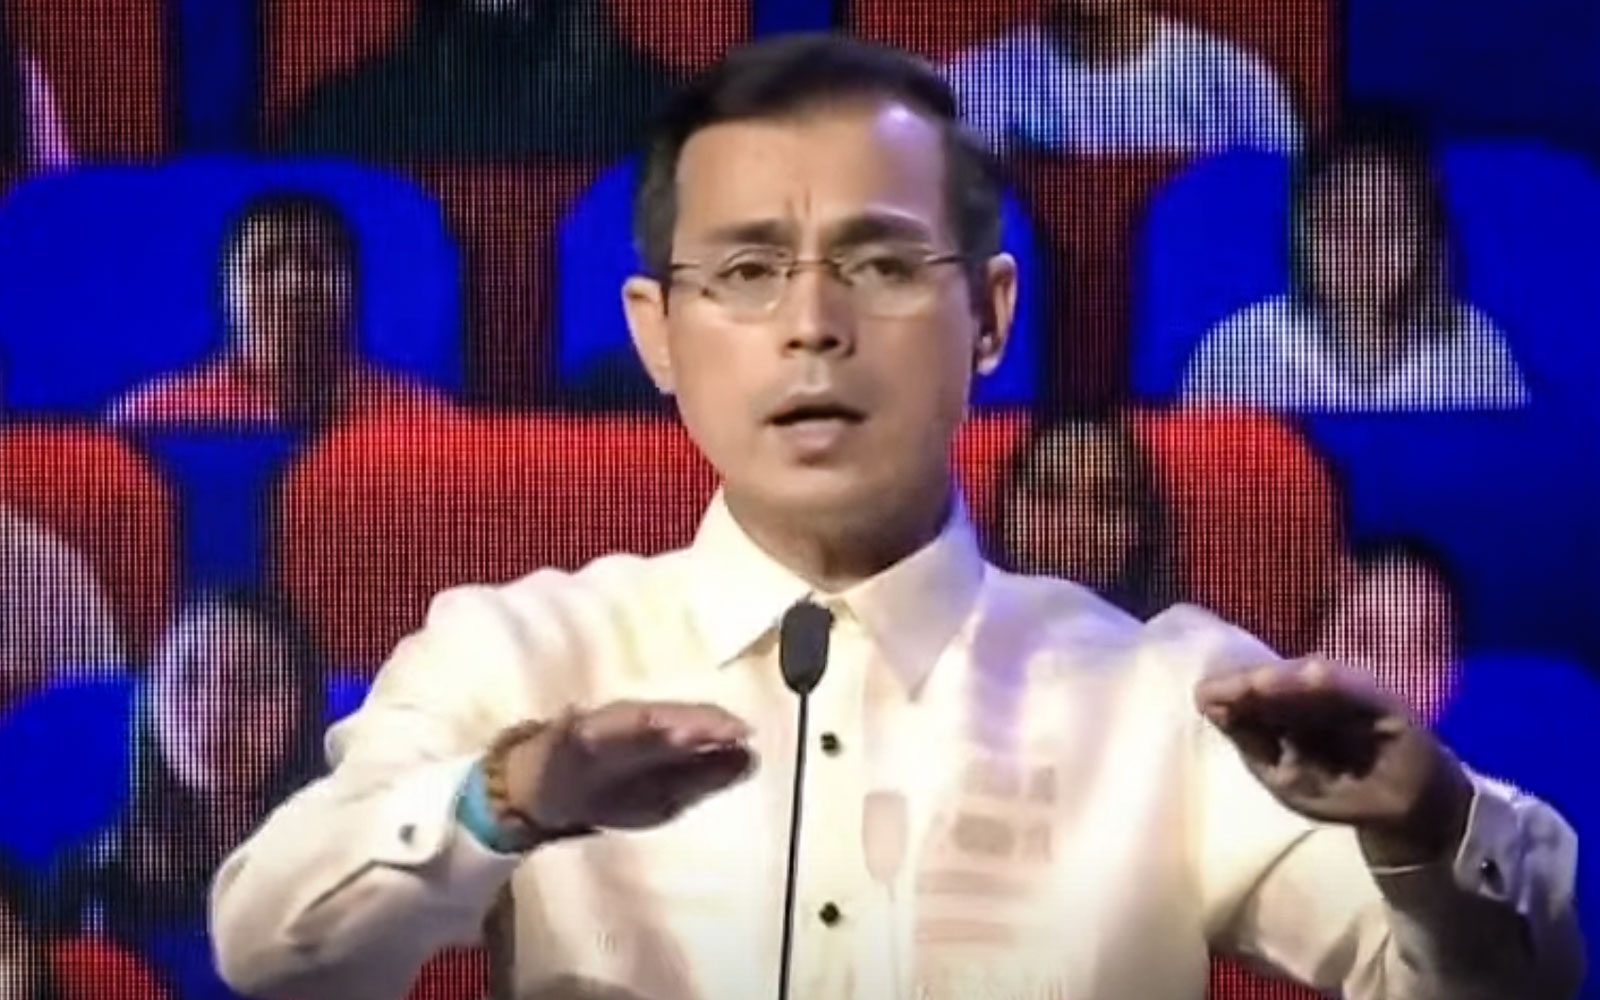 Isko haunted by excess campaign funds, plays it safe in CNN PH debate